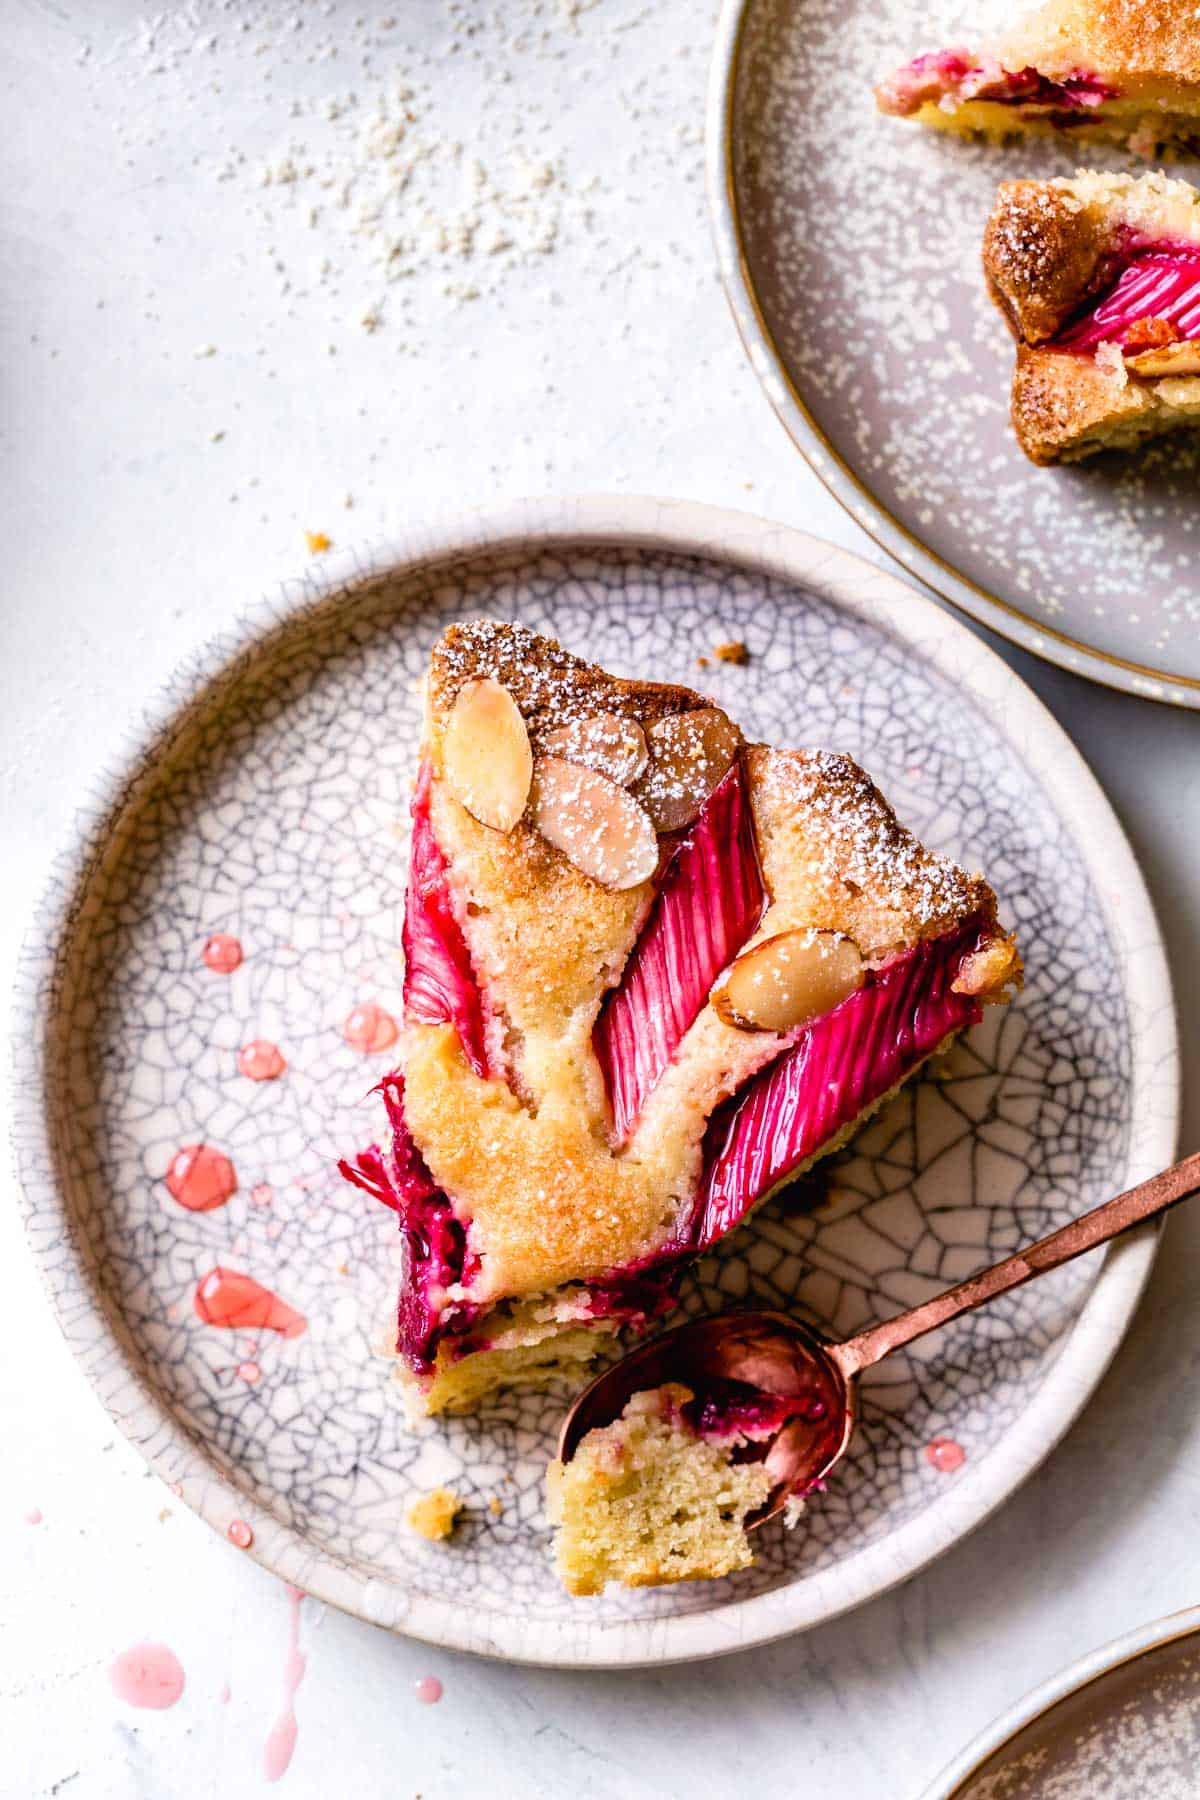 Gluten-free rhubarb cake slice on a plate with a bite taken out